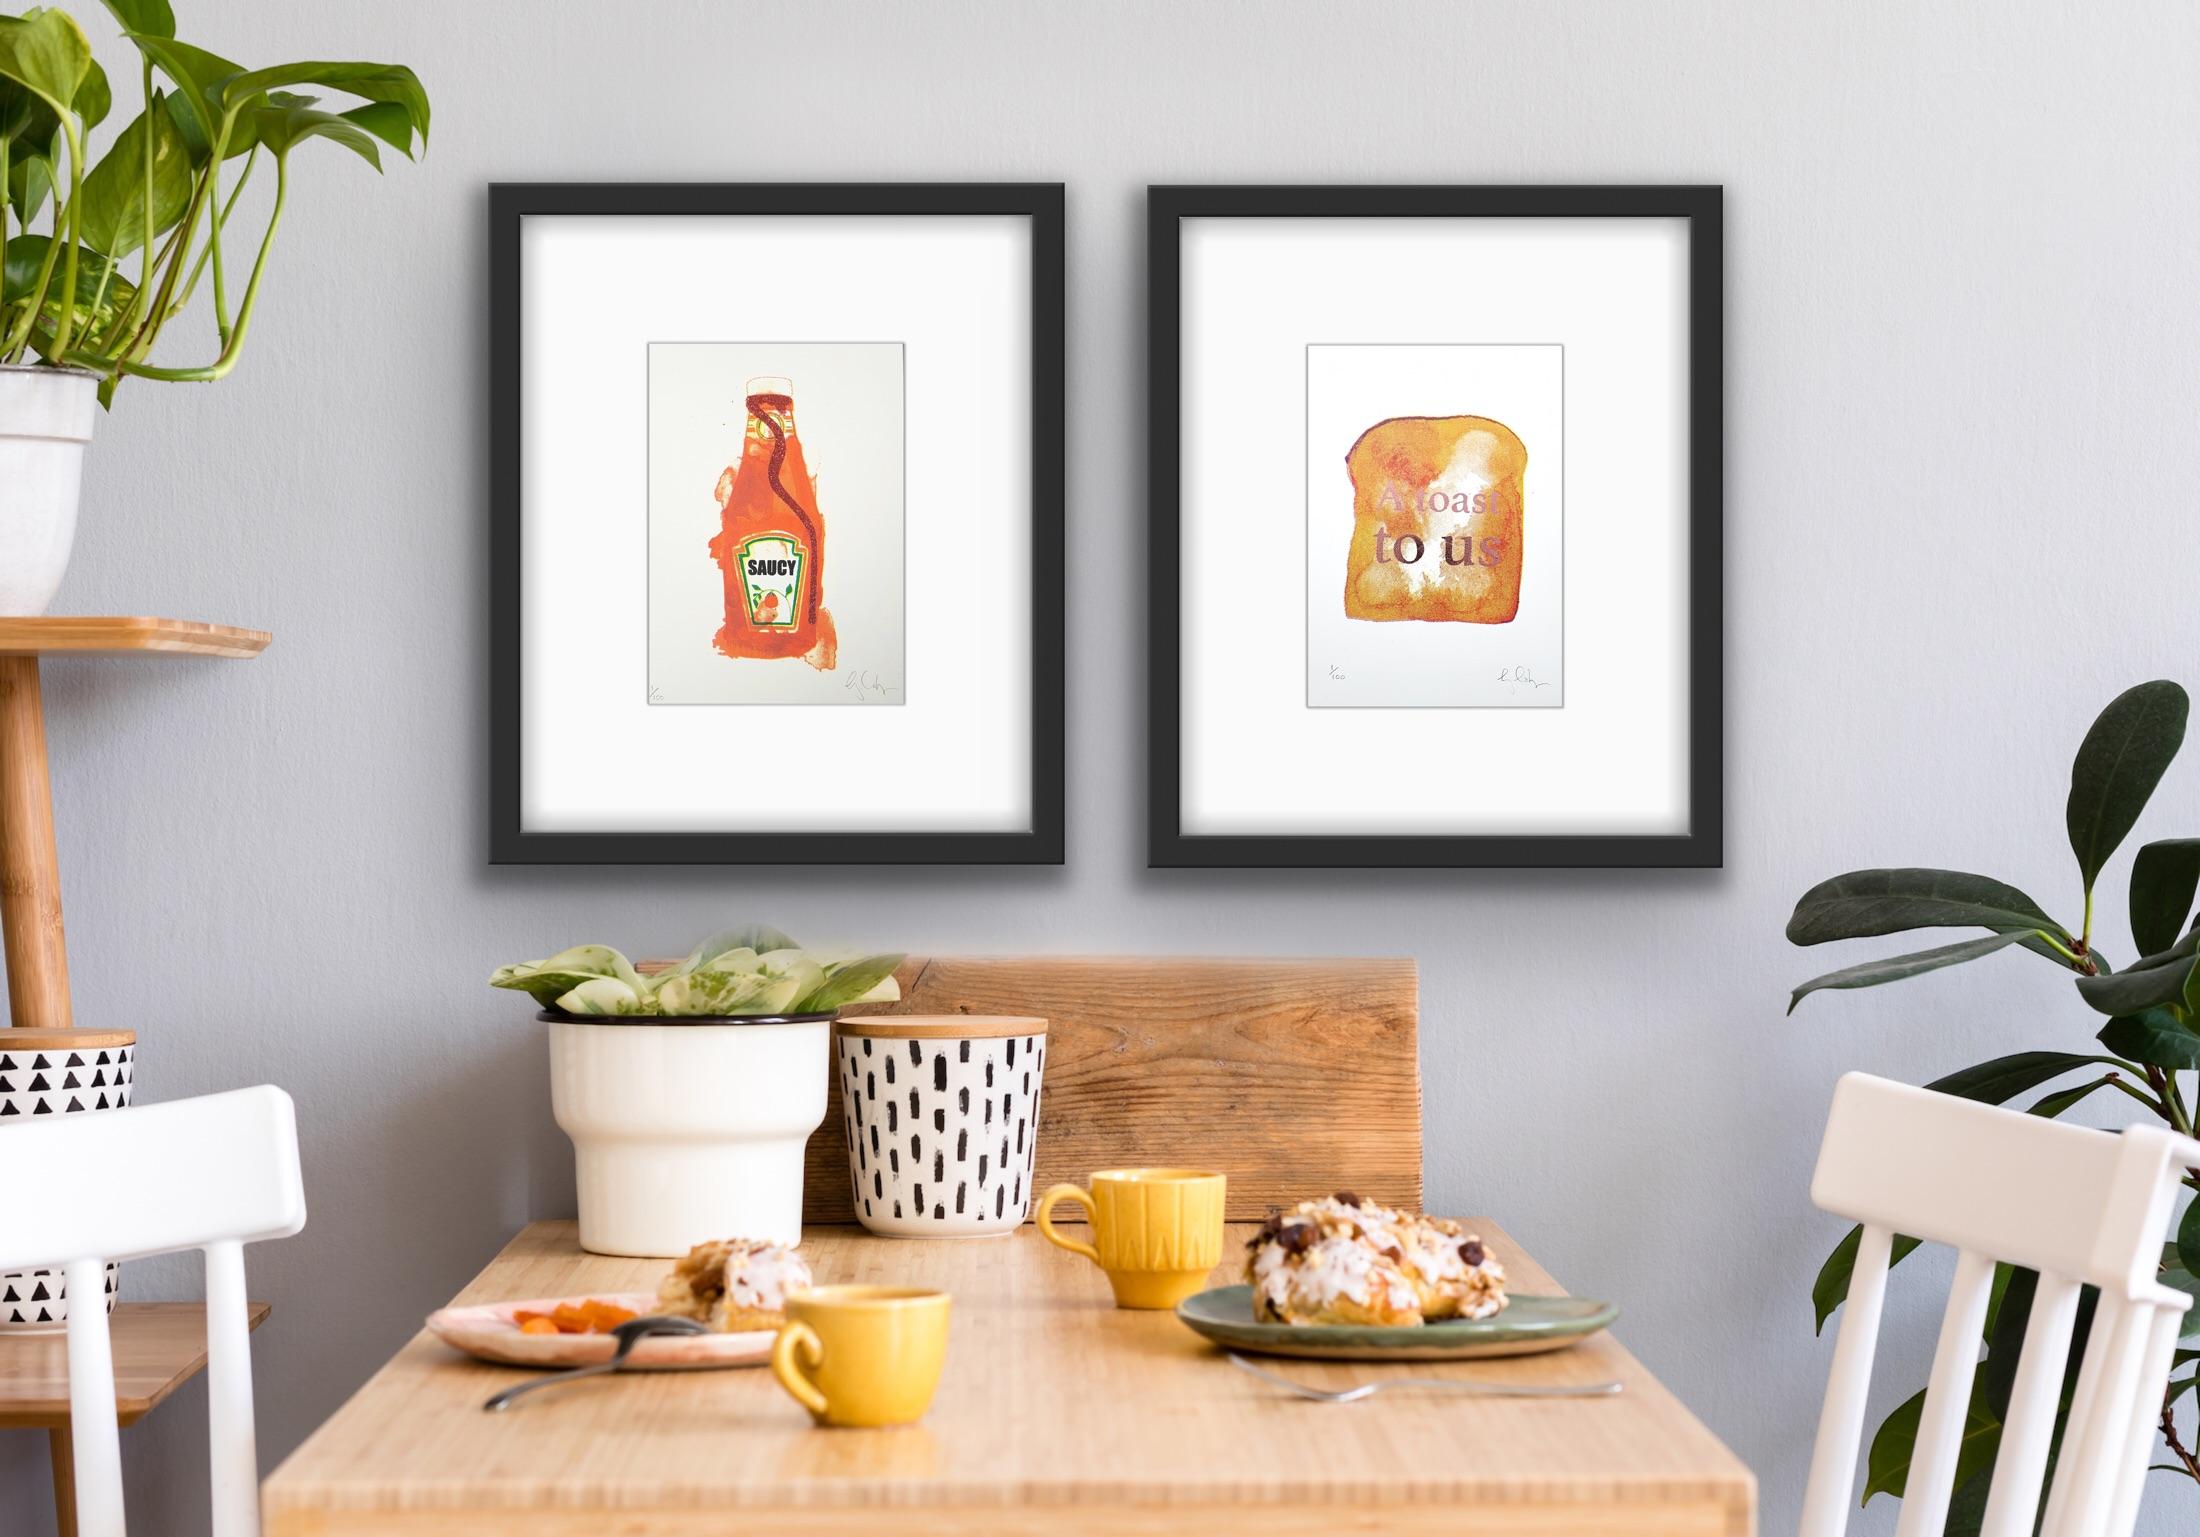 A Toast to Us and Mini Saucy  - Print by Gavin Dobson 